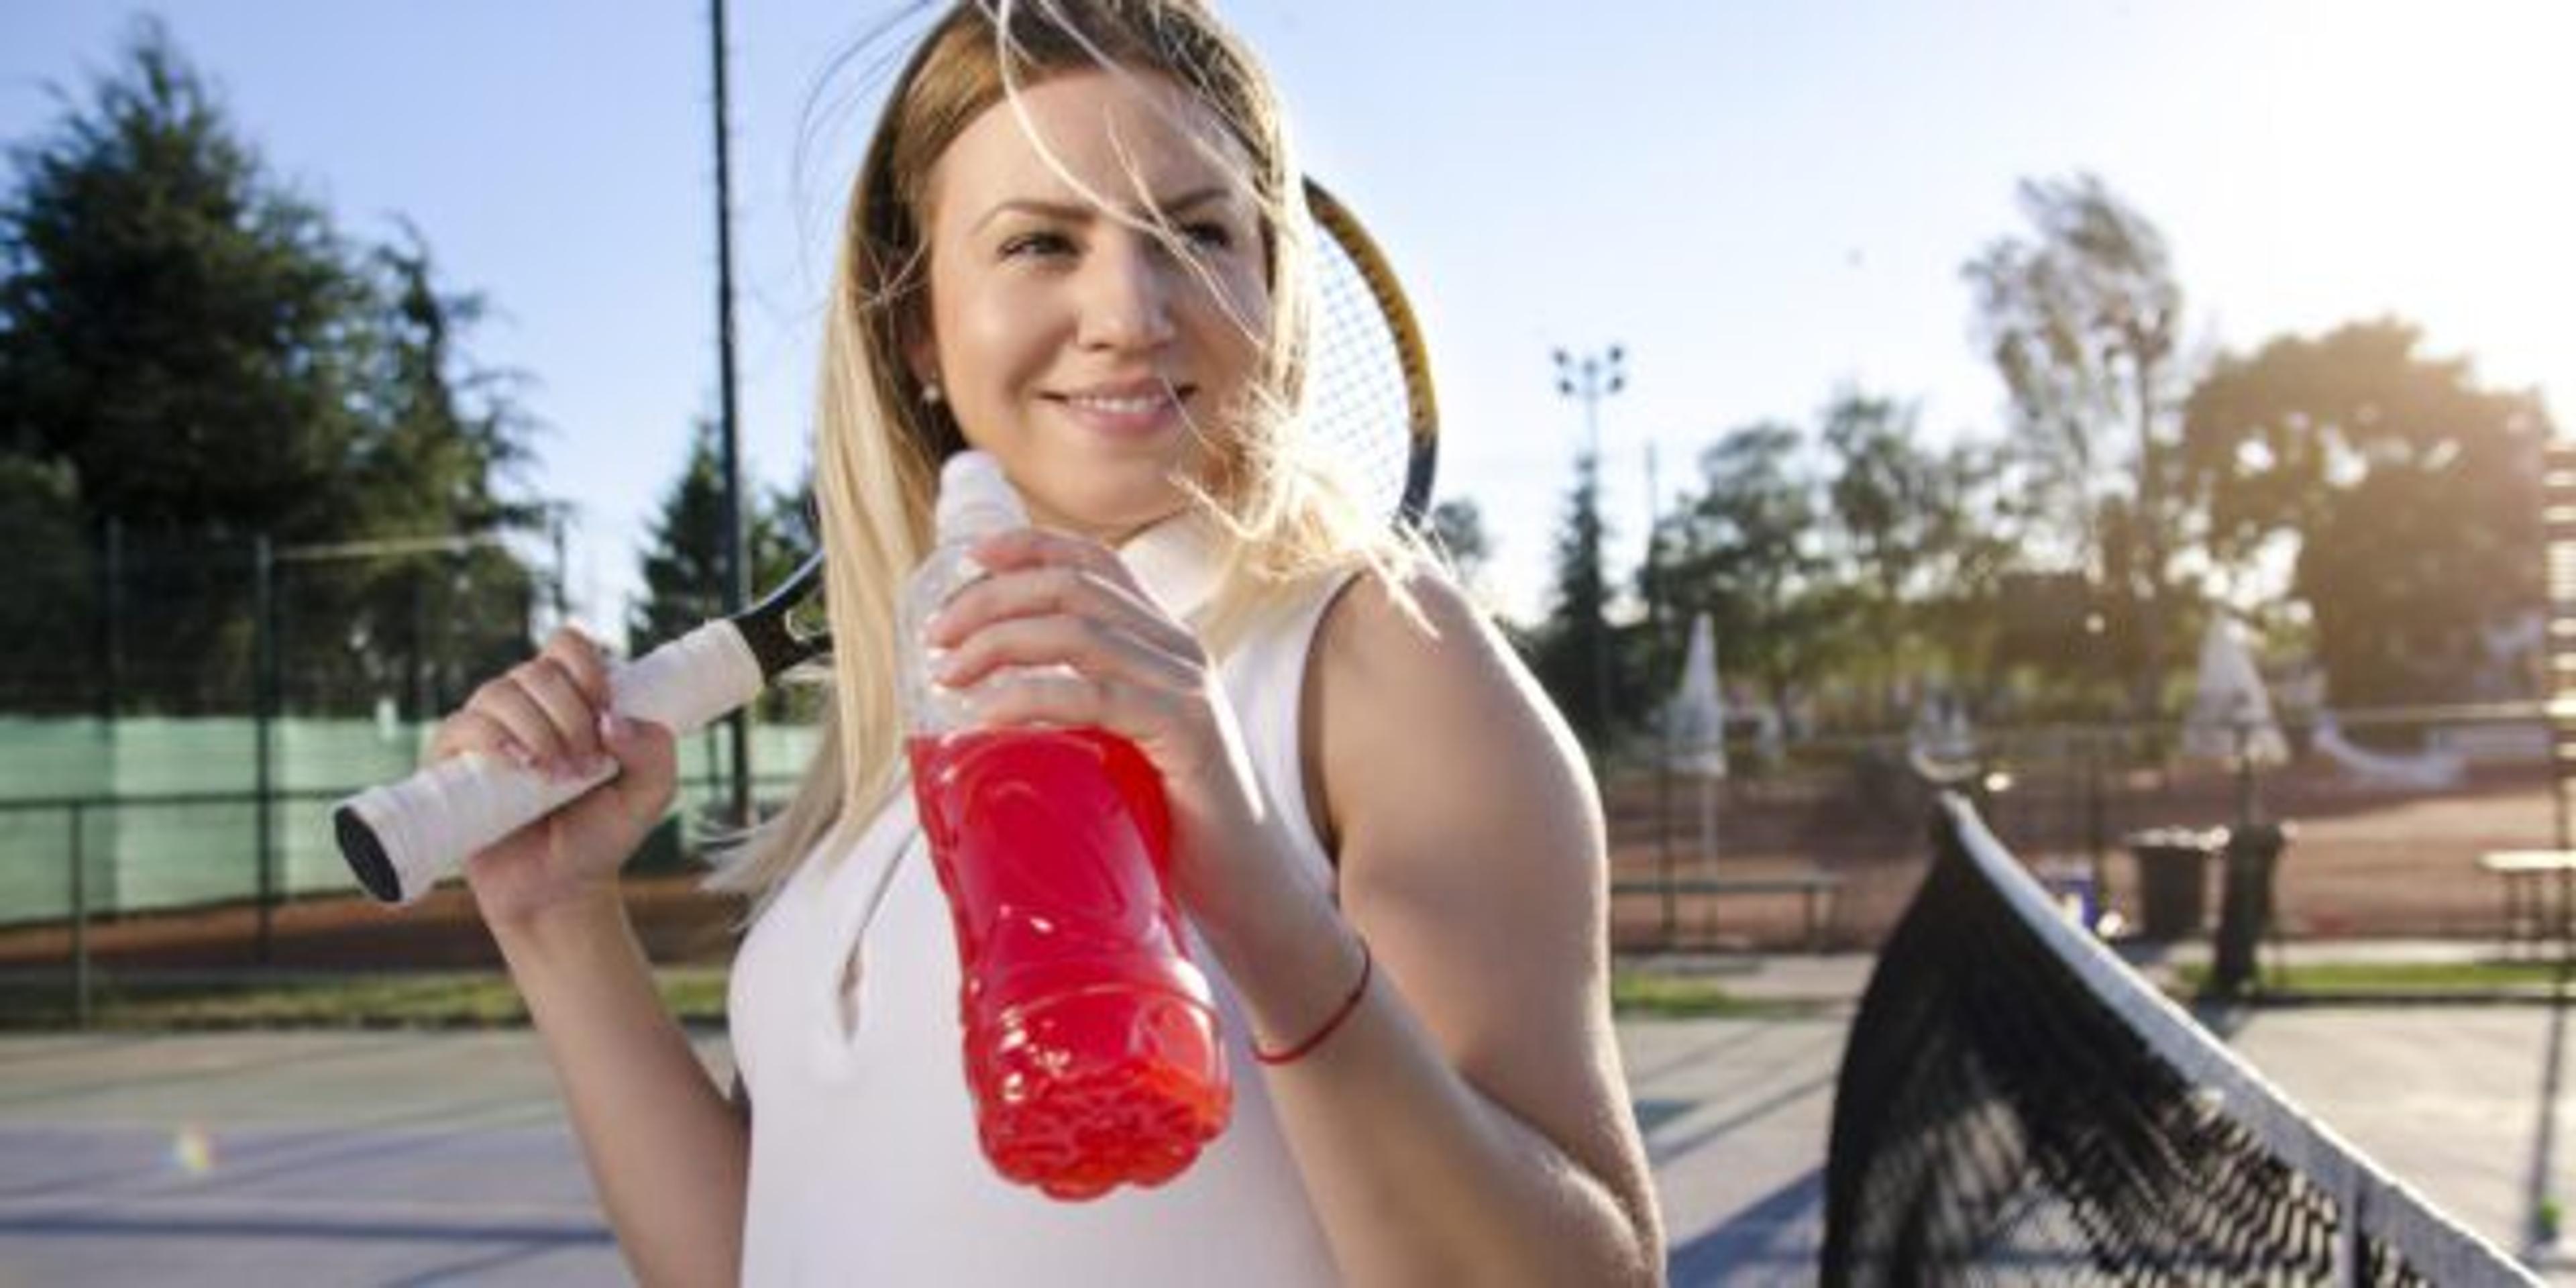 Gorgeous young female tennis player drinking energy drink